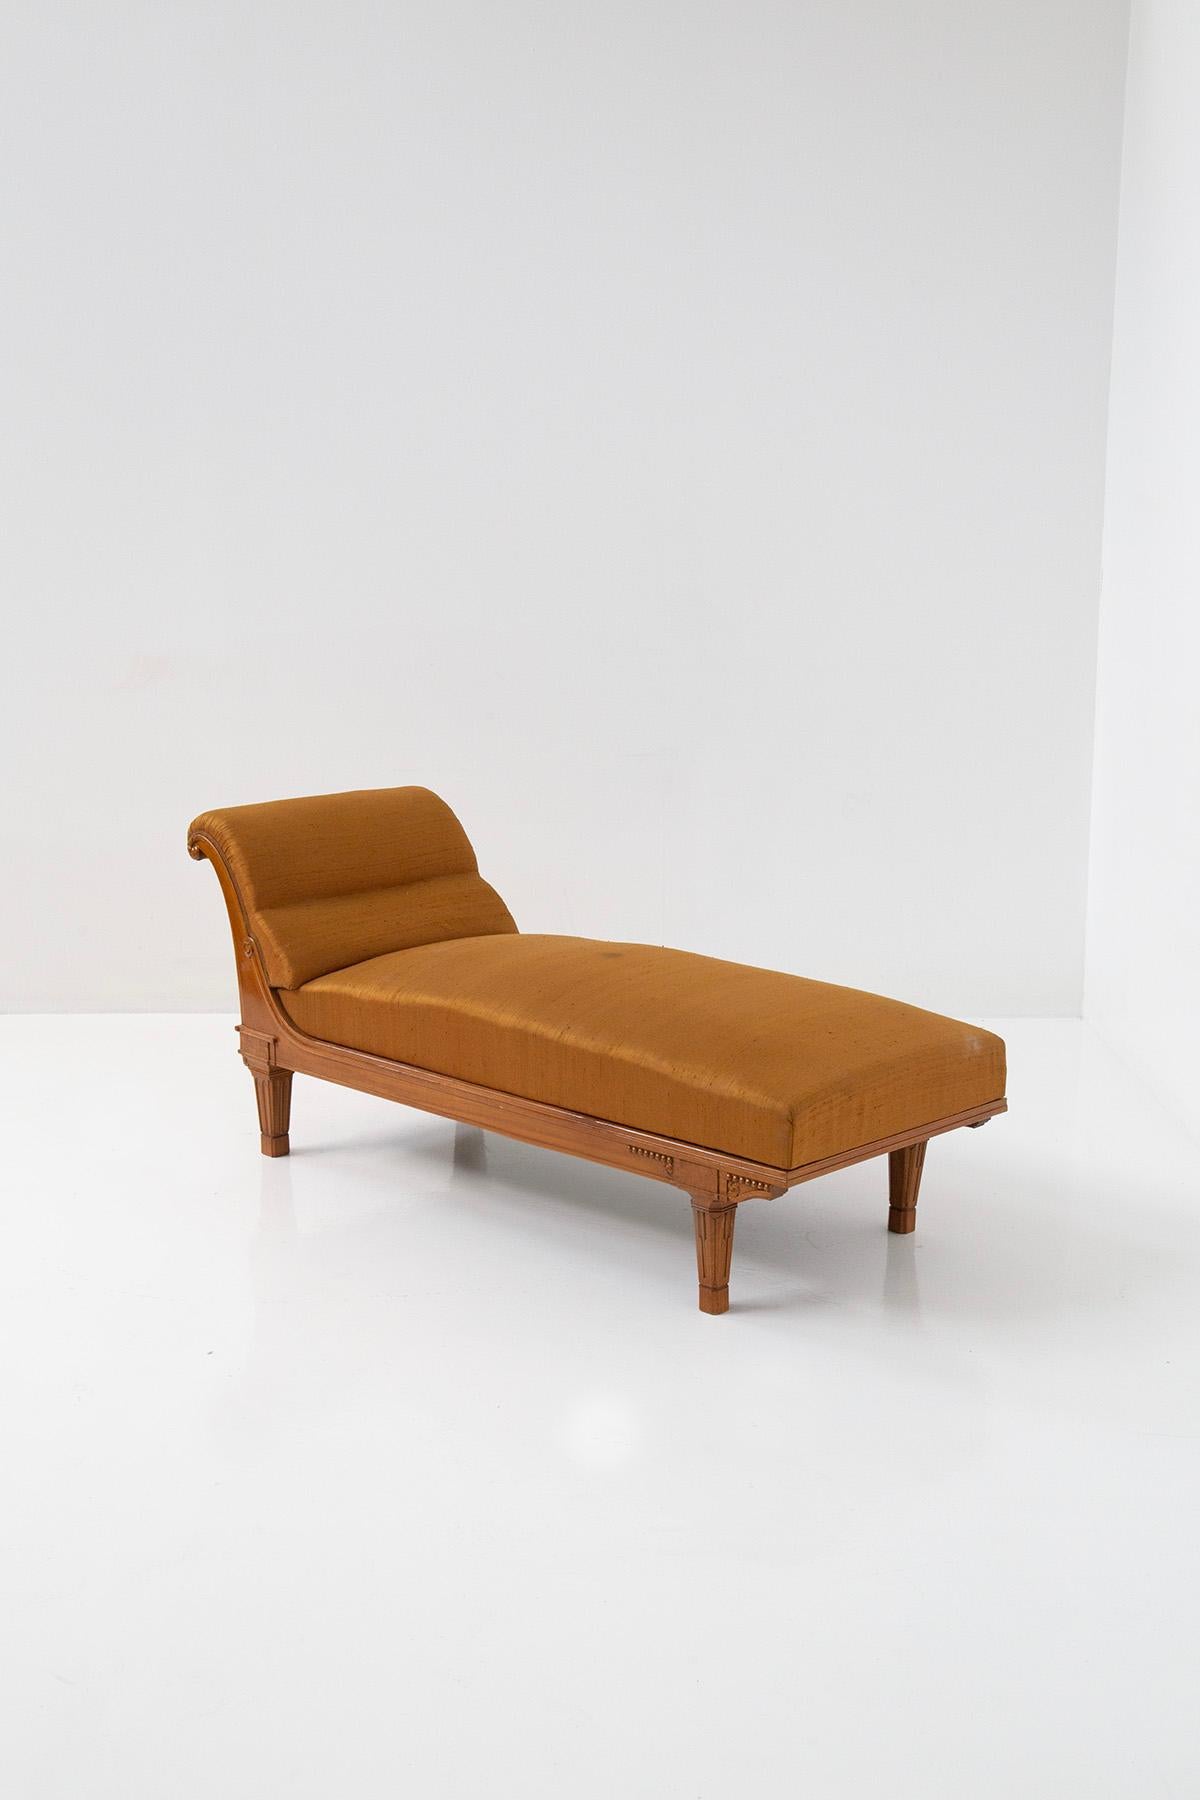 The refined French chaise lounge, dating from the period between Art Nouveau and Art Deco, is a truly exquisite piece of furniture. Upholstered in a luxurious orange silk satin, it exudes elegance and sophistication. The use of such a precious